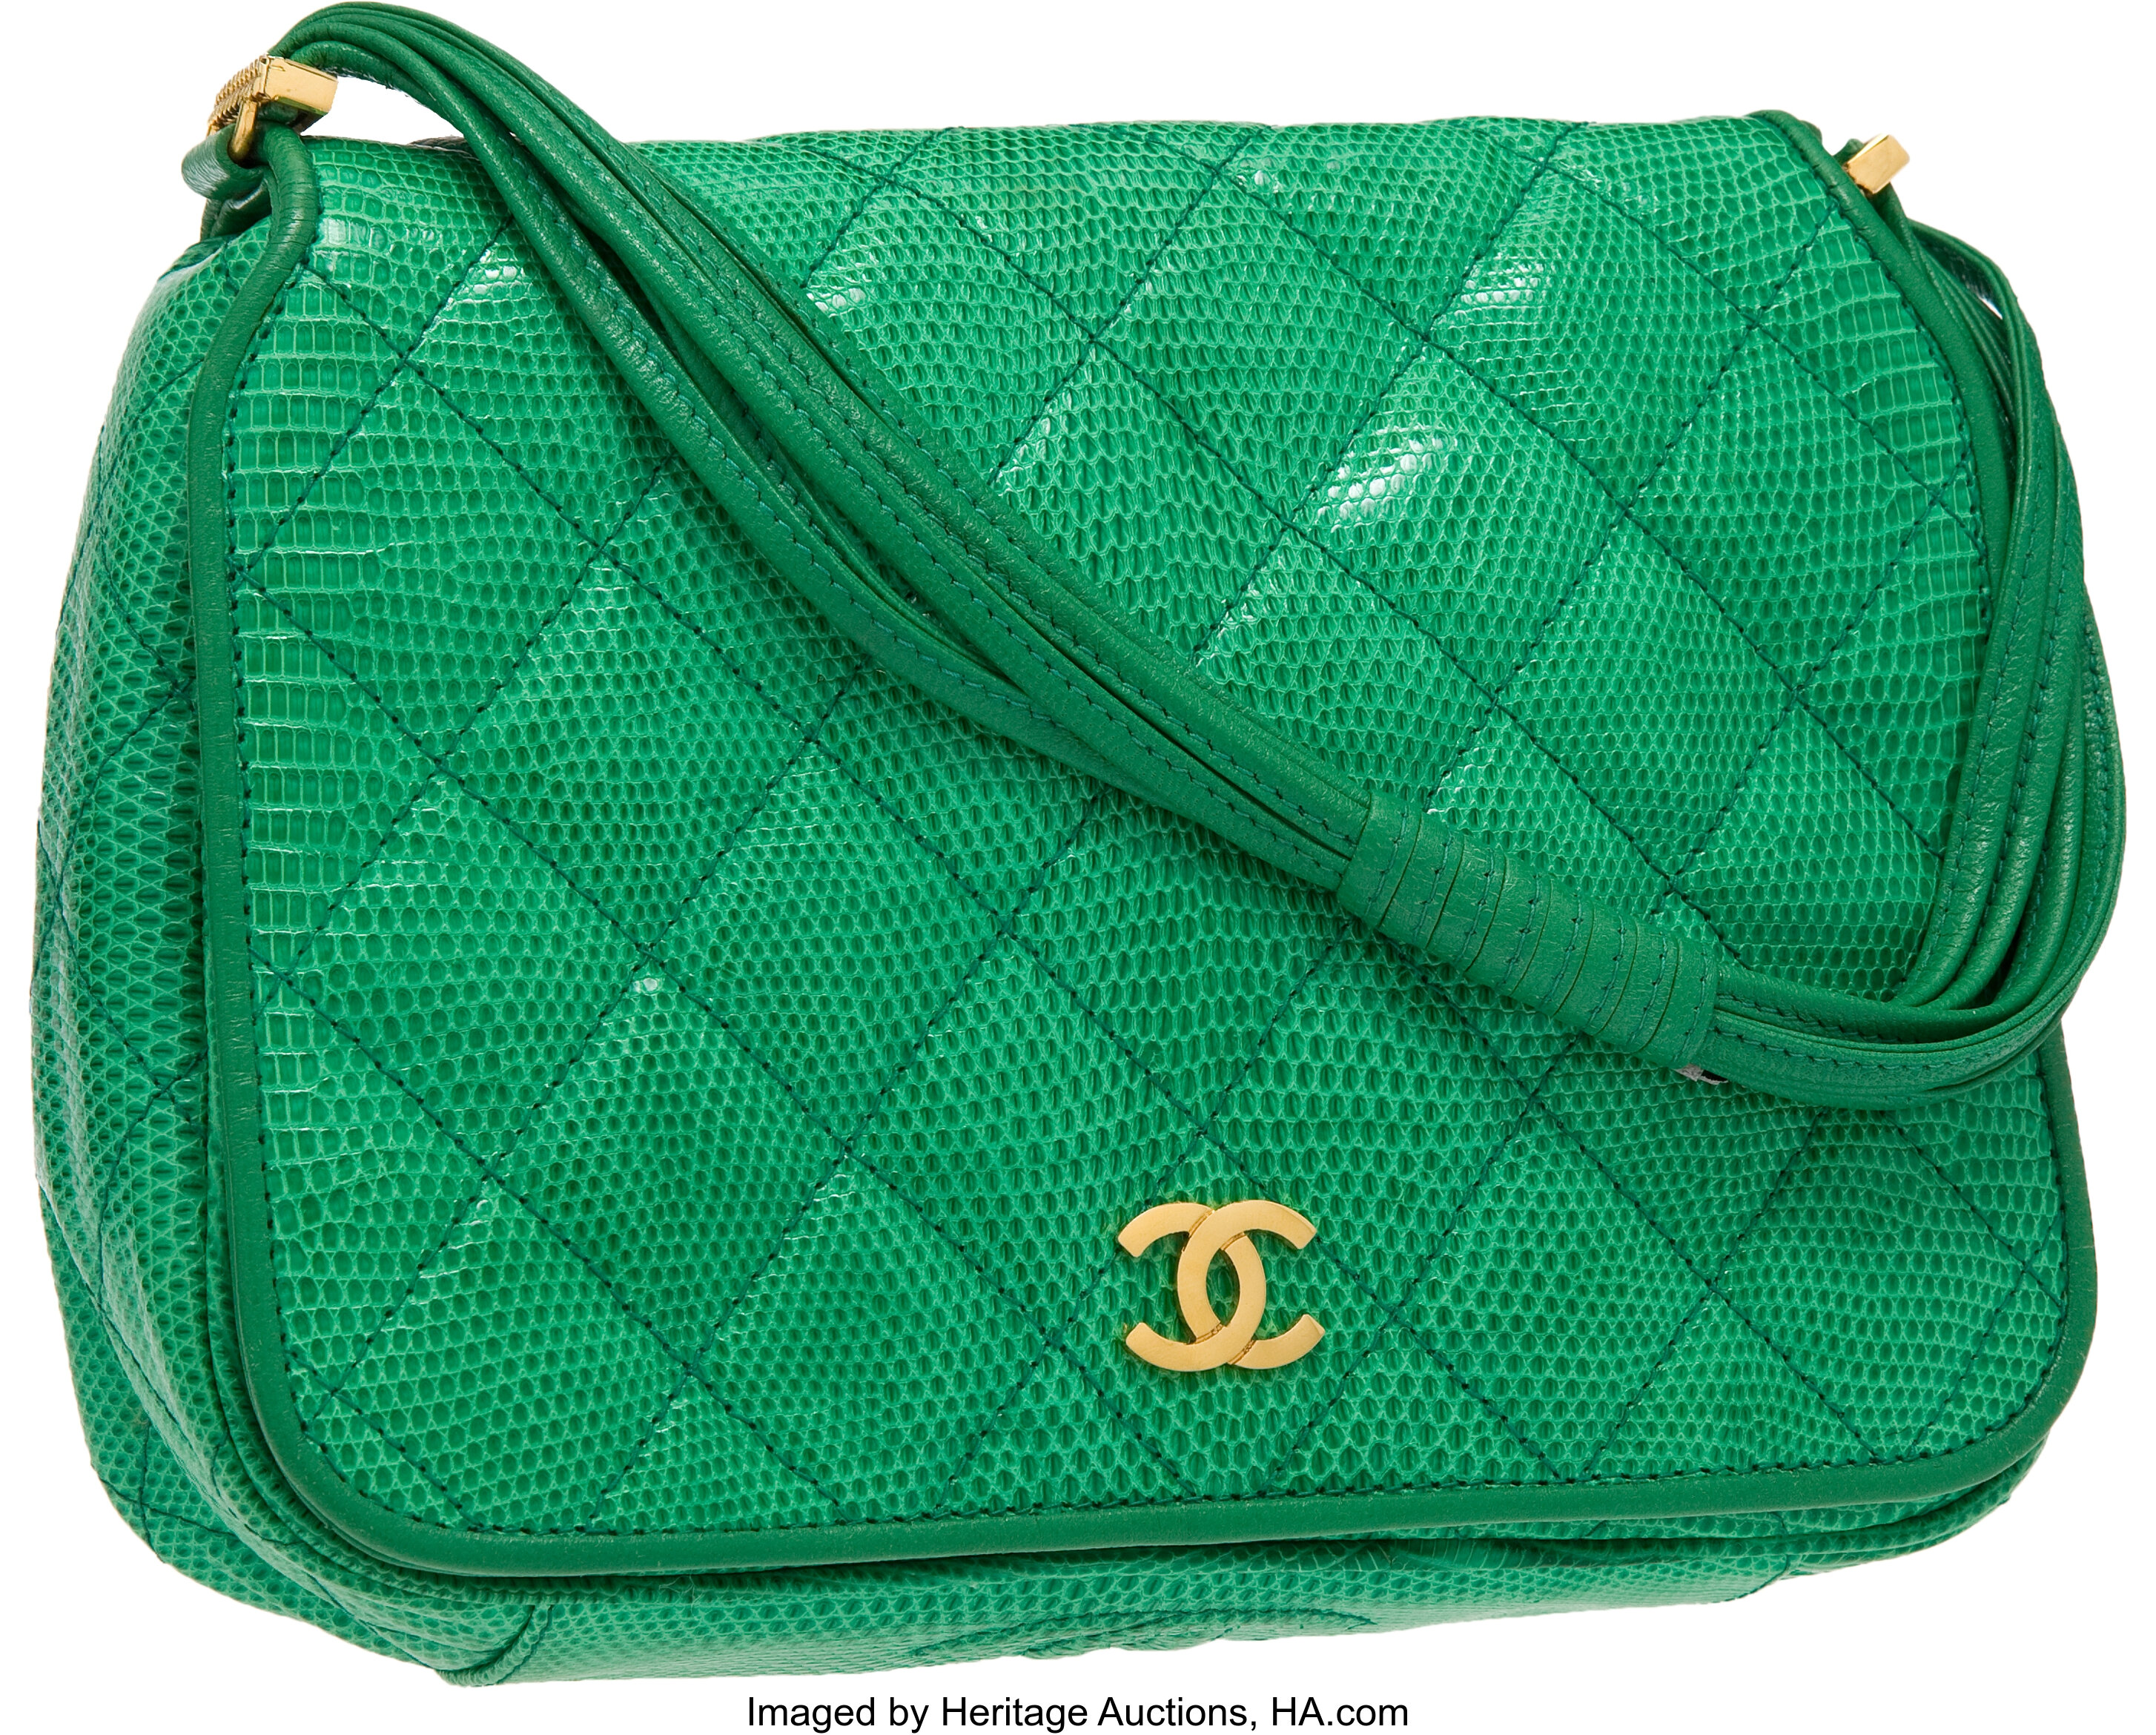 Search: Chanel [776 790 231]